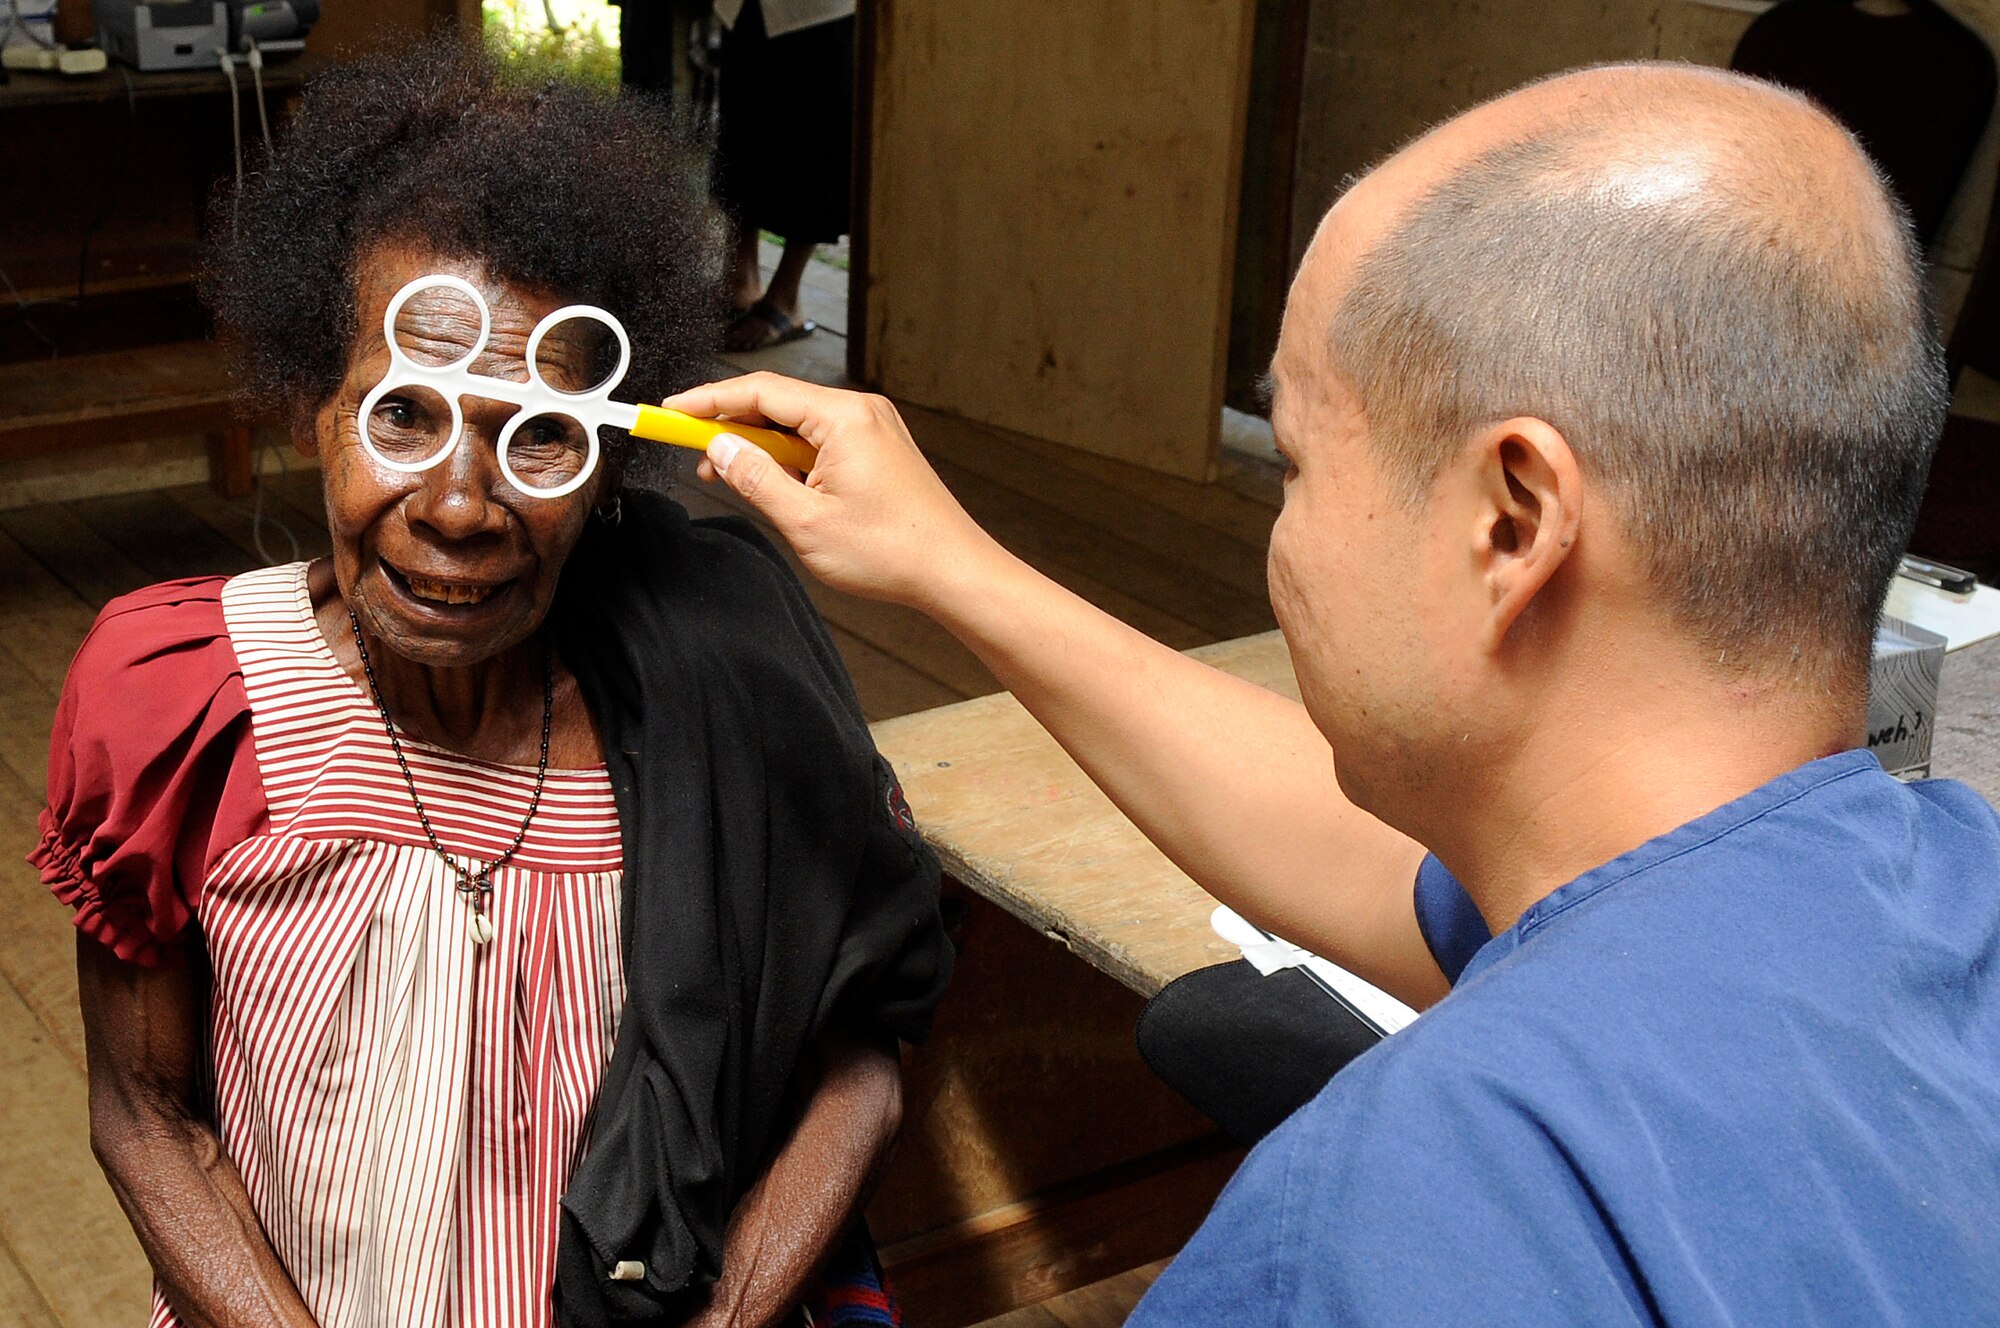 Lt. Col. Weilun Hsu, the 374th Aerospace Medicine Squadron optometry flight commander from Yokota Air Base, Japan, determines which glasses to prescribe a local during Pacific Angel 15-4 at Unggai Primary School in Papua New Guinea, June 1, 2015. The optometrists prescribed more than 200 glasses, allowing the locals to walk away seeing better than before. (U.S. Air Force photo/Staff Sgt. Marcus Morris)